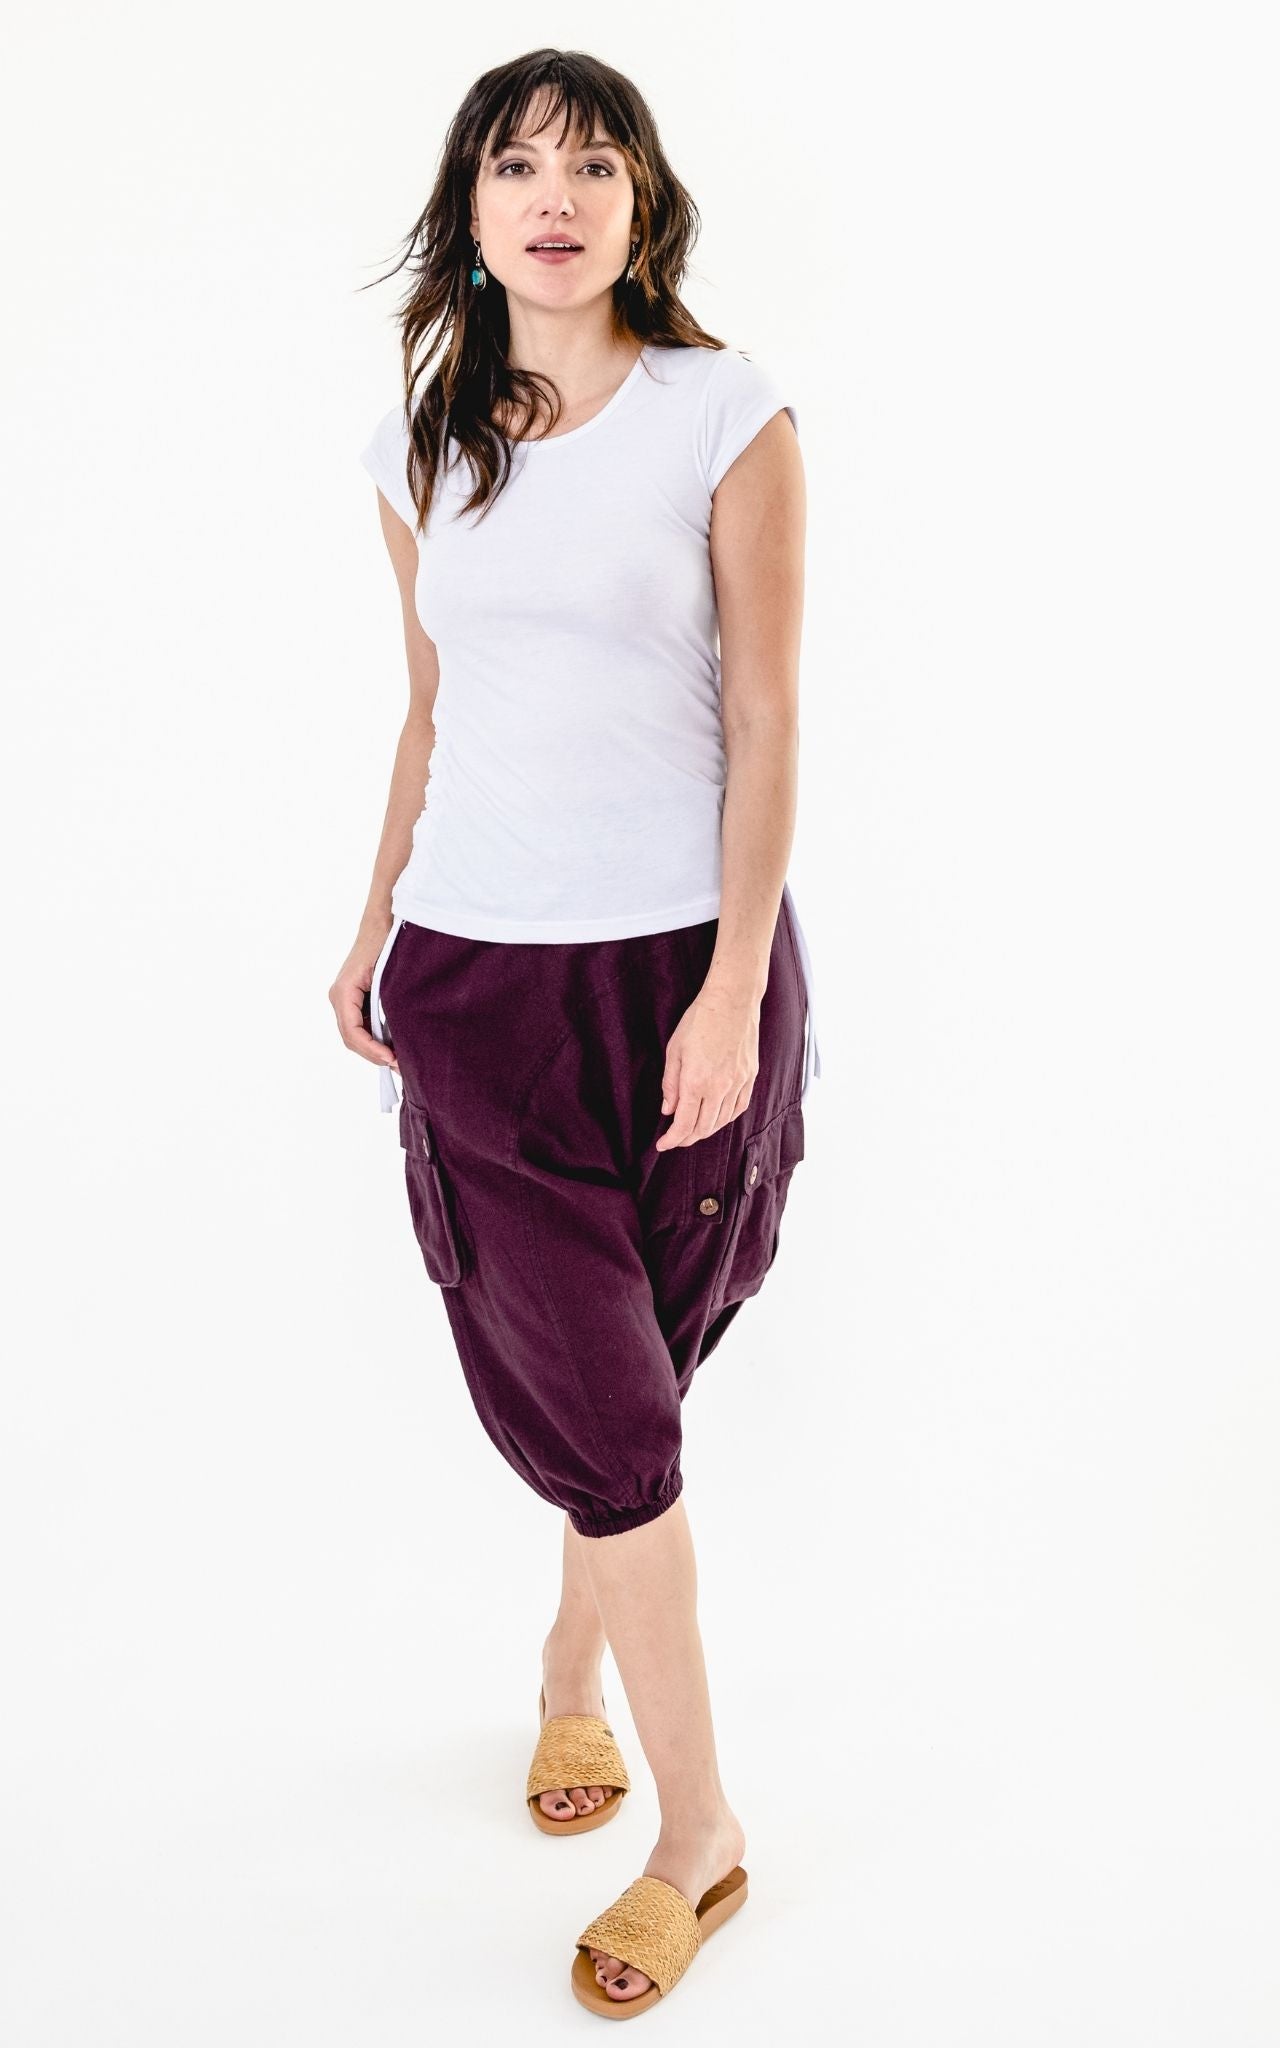 Surya Australia Ethical Cotton Drop Crotch Shorts made in Nepal - Wine